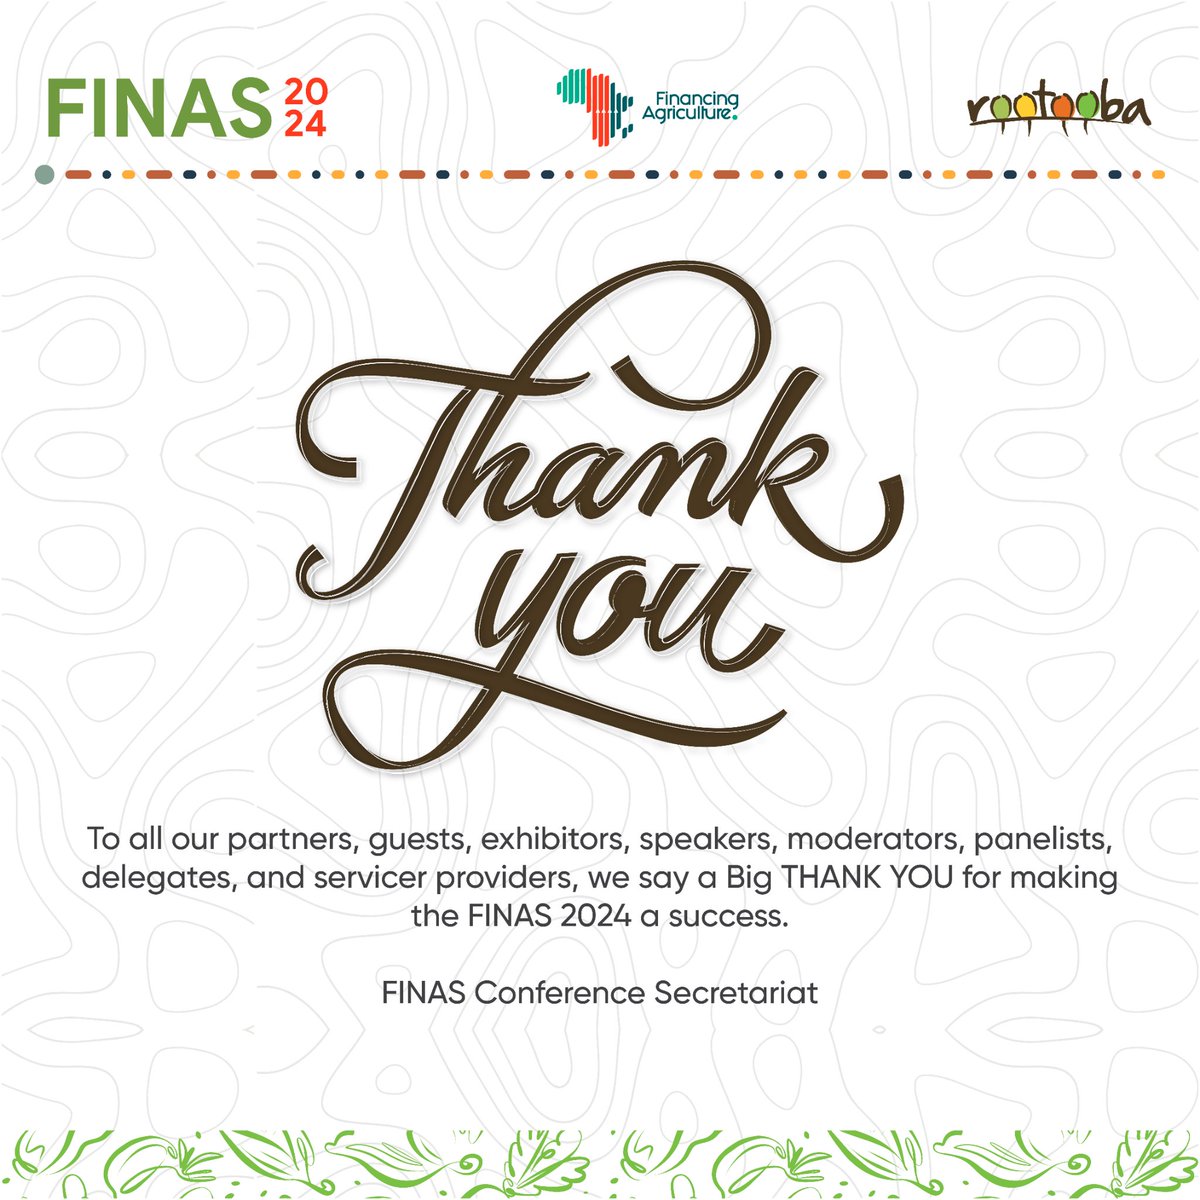 From the FINAS Conference Secretariat, we say a BIG THANK YOU to everyone that made the #FINAS2024 a success.